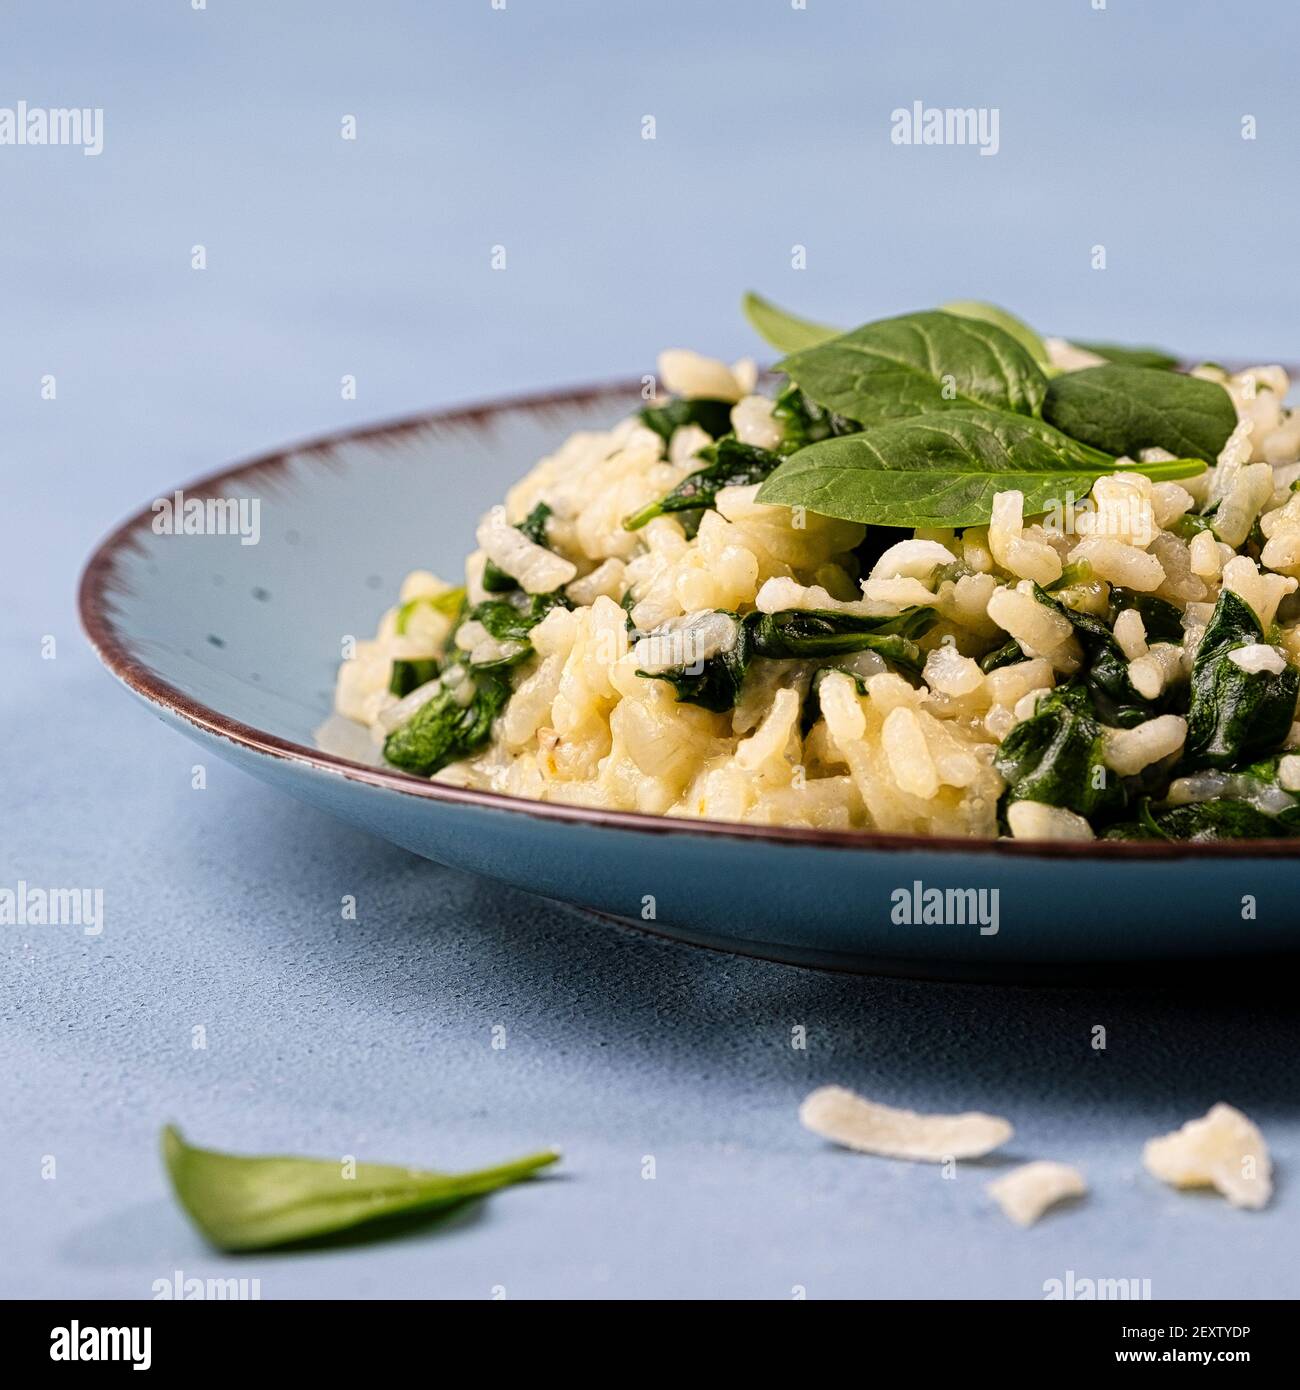 Risotto with young spinach leaves arranged on a petrol colored plate with napkin, decorated with fresh spinach leaves Stock Photo